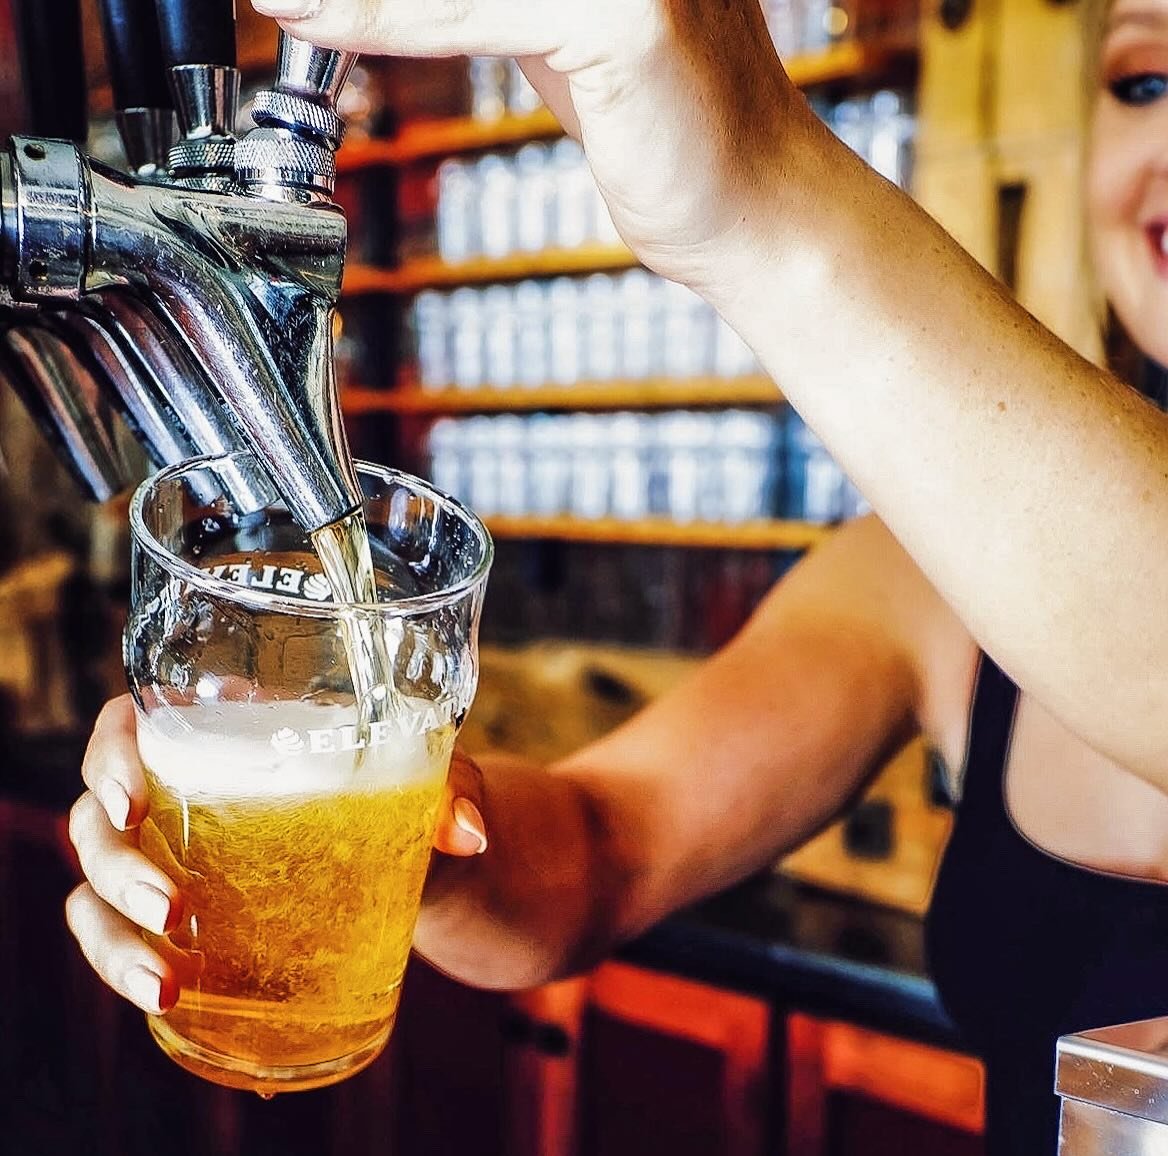 Join us and @synergy_in_service_industry today (3/21) in raising a glass to support their efforts to provide free mental health services to food and beverage employees in Chaffee County.

10% of the day&rsquo;s proceeds will be donated to Synergy in 